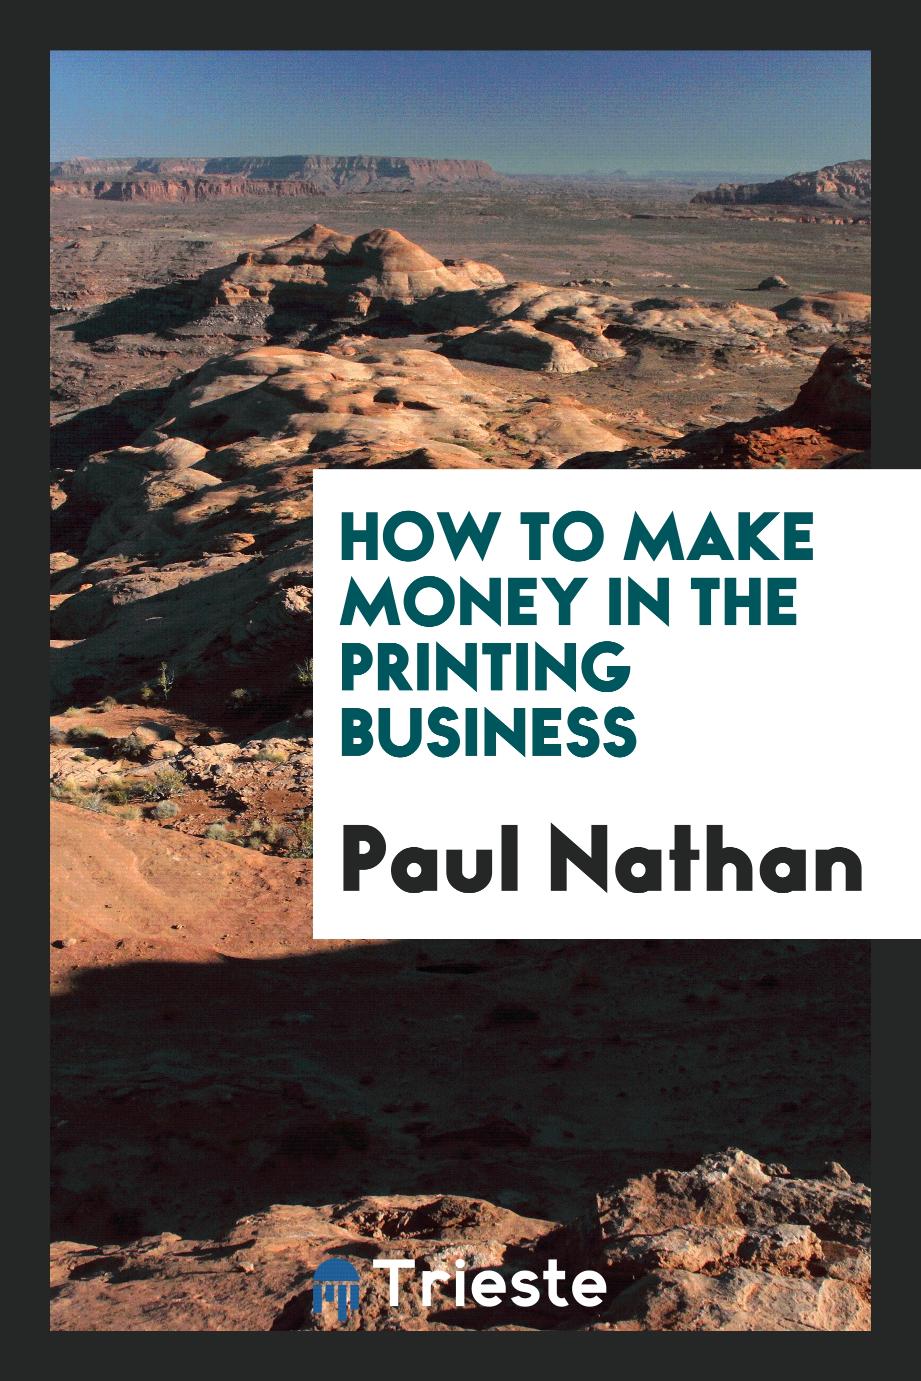 How to make money in the printing business